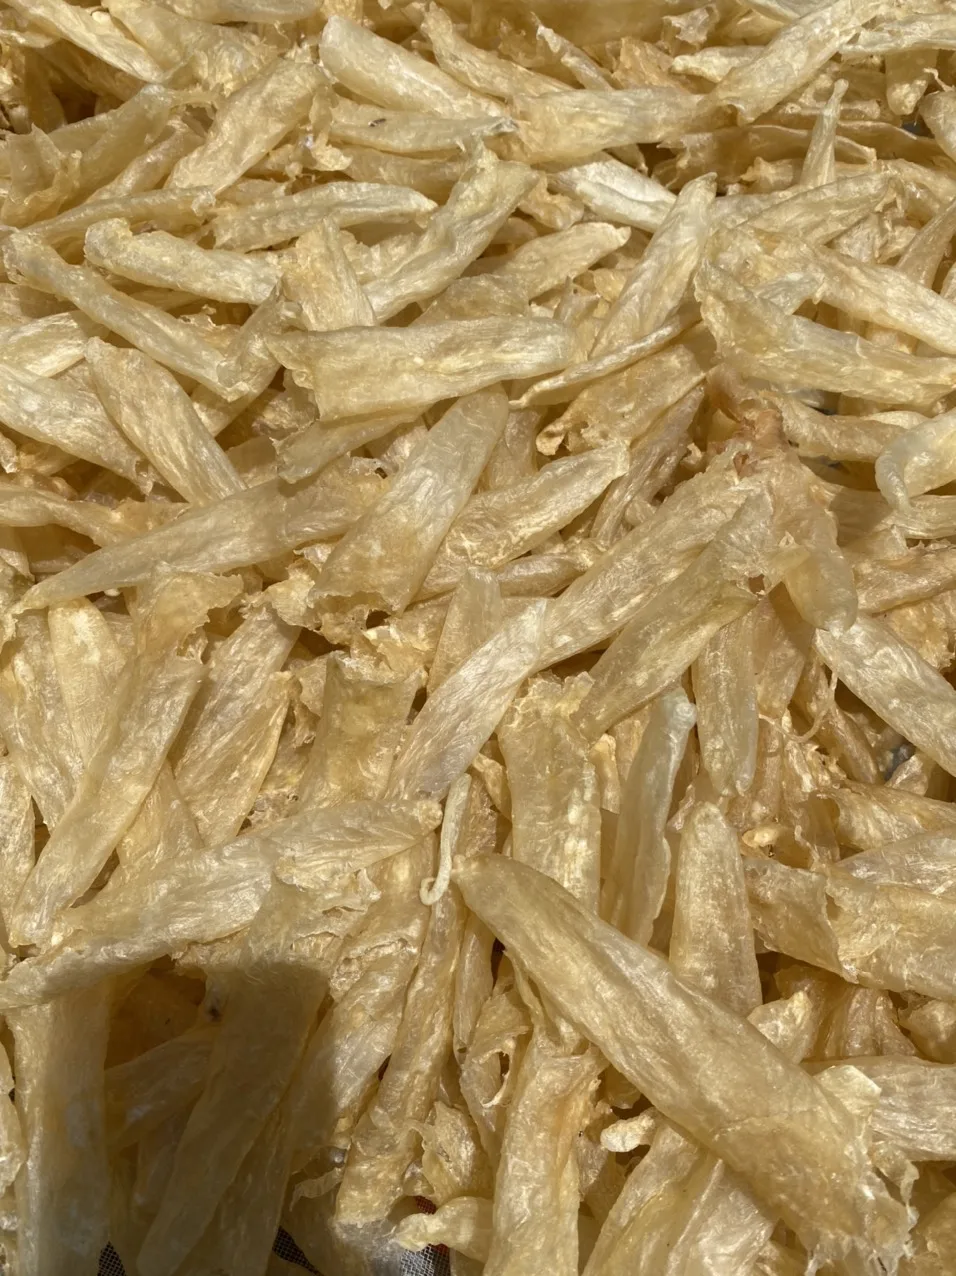 NATURAL DRIED FISH MAW FROM PANGASIUS FISH  WHOLESALE